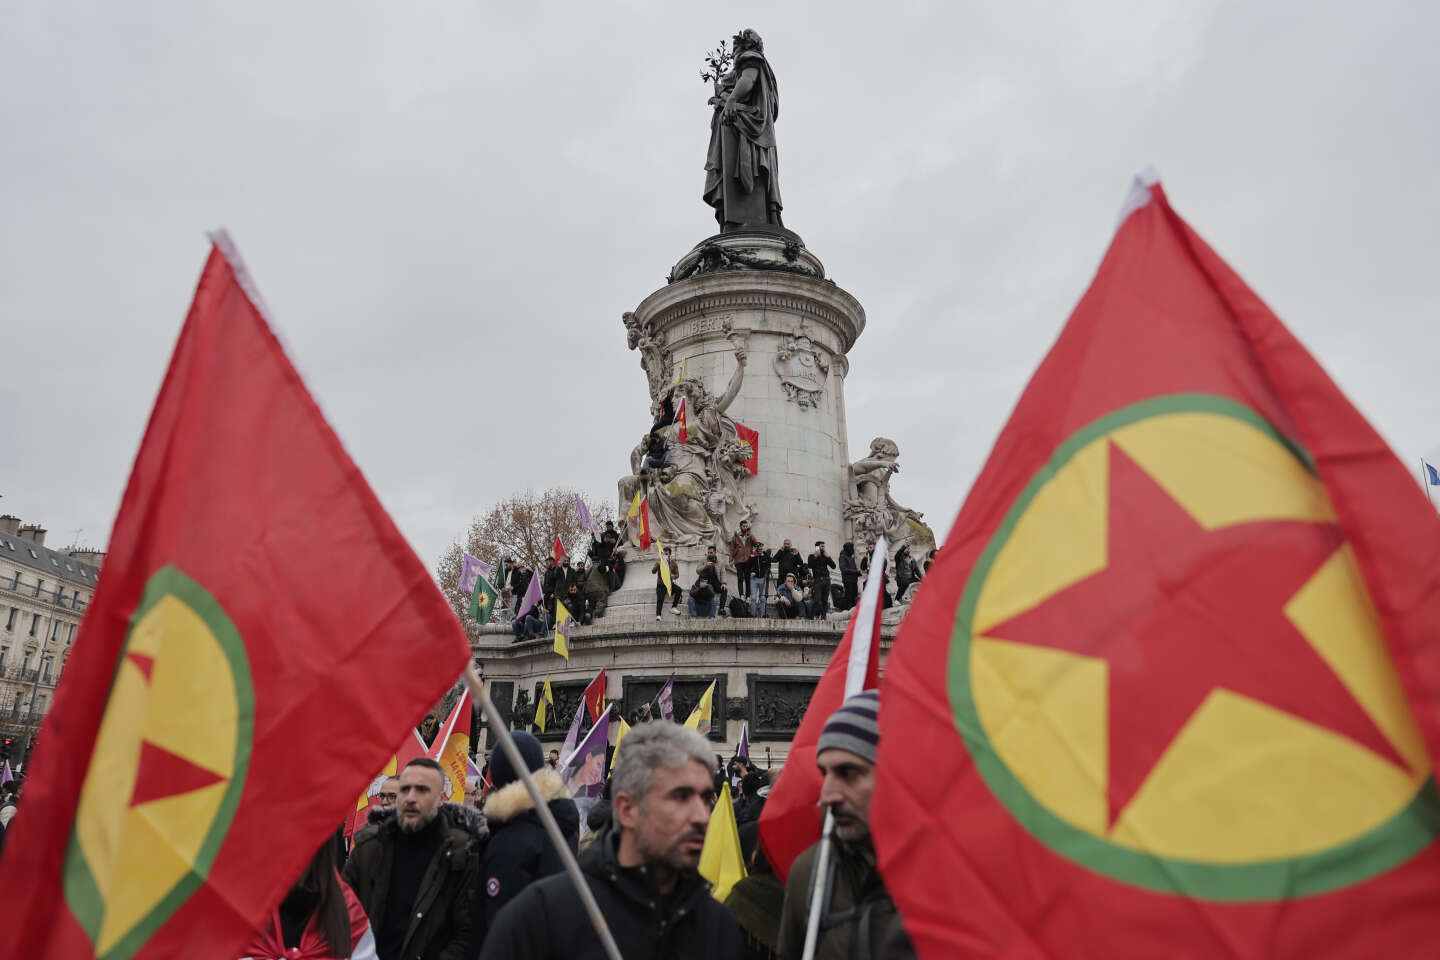 pkk-members-in-france-sentenced-to-up-to-five-years-in-prison